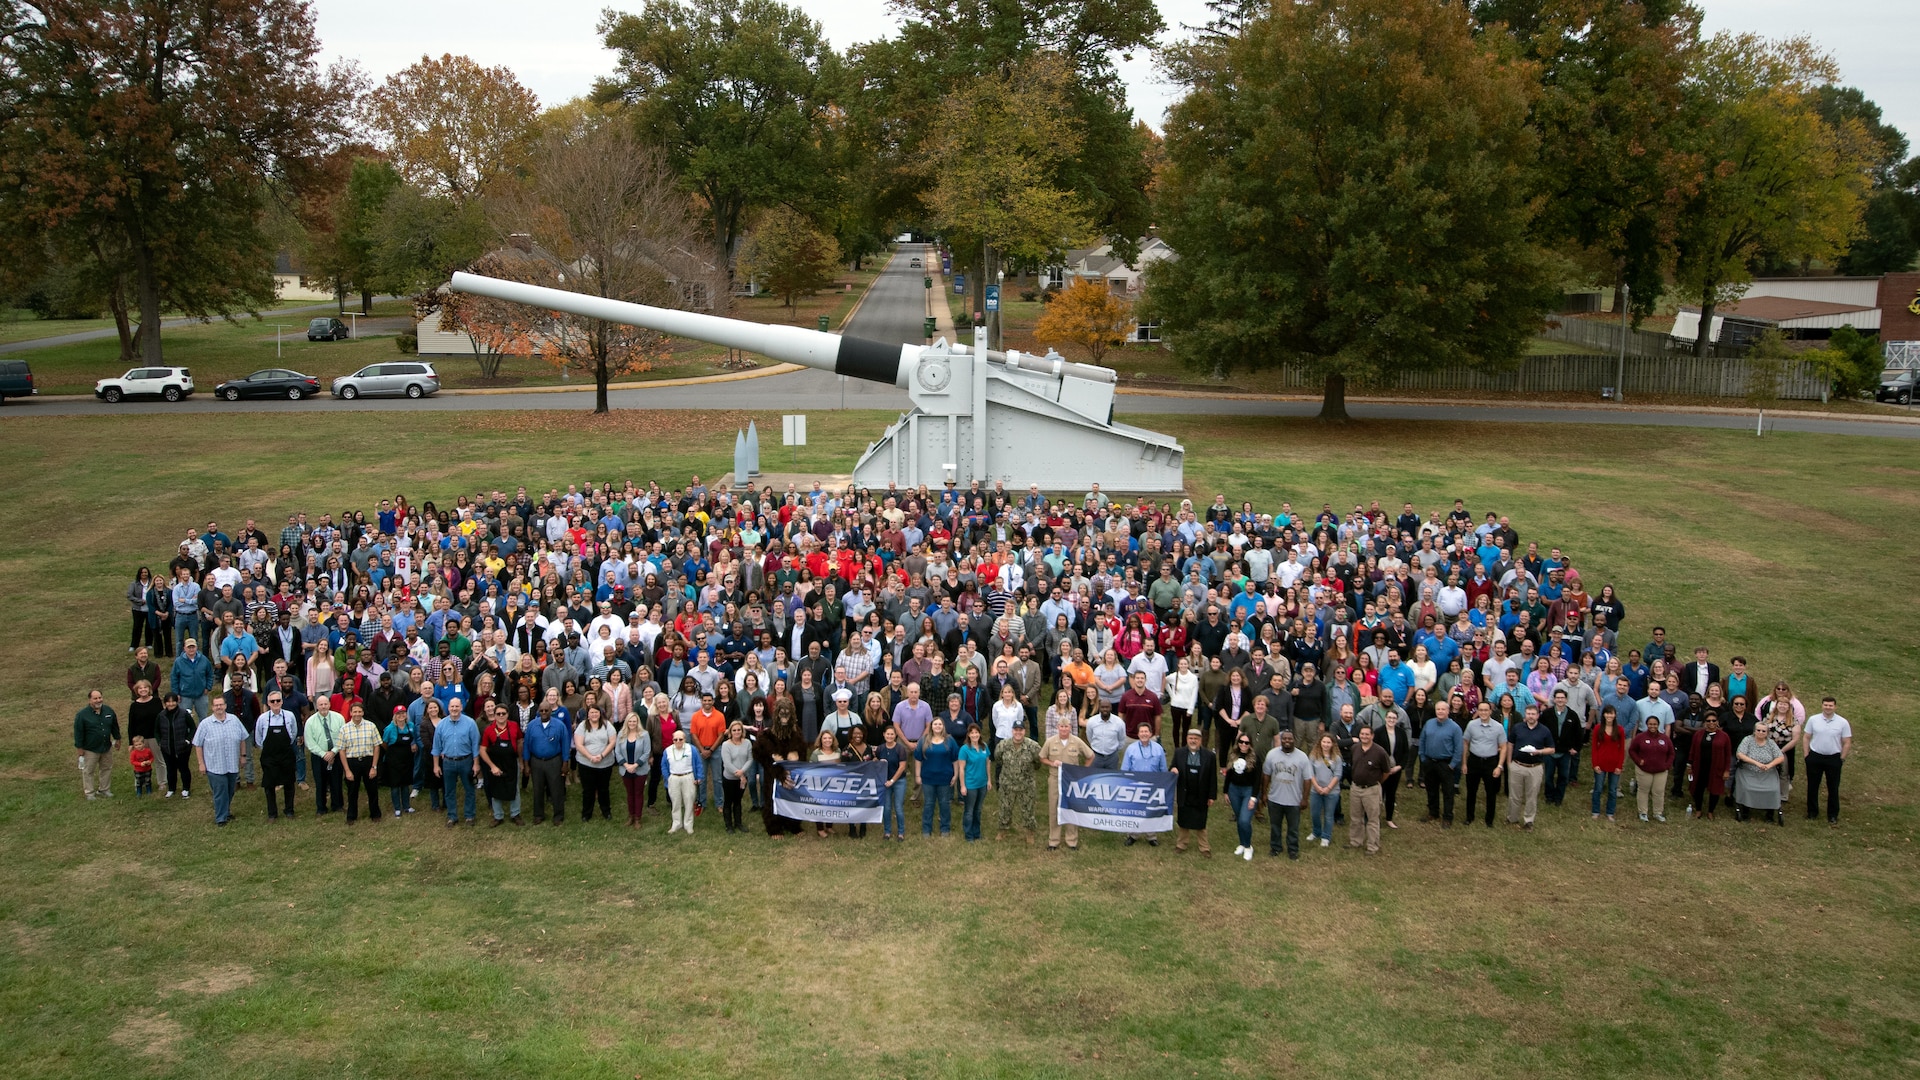 IMAGE: NSWC Dahlgren Division held a command picnic that featured lunch, music and sporting events at the parade field. Employees posed for a command photograph entitled "100 Years of NSWCDD Accomplishments" in front of the U.S. Navy 16-inch battleship gun.